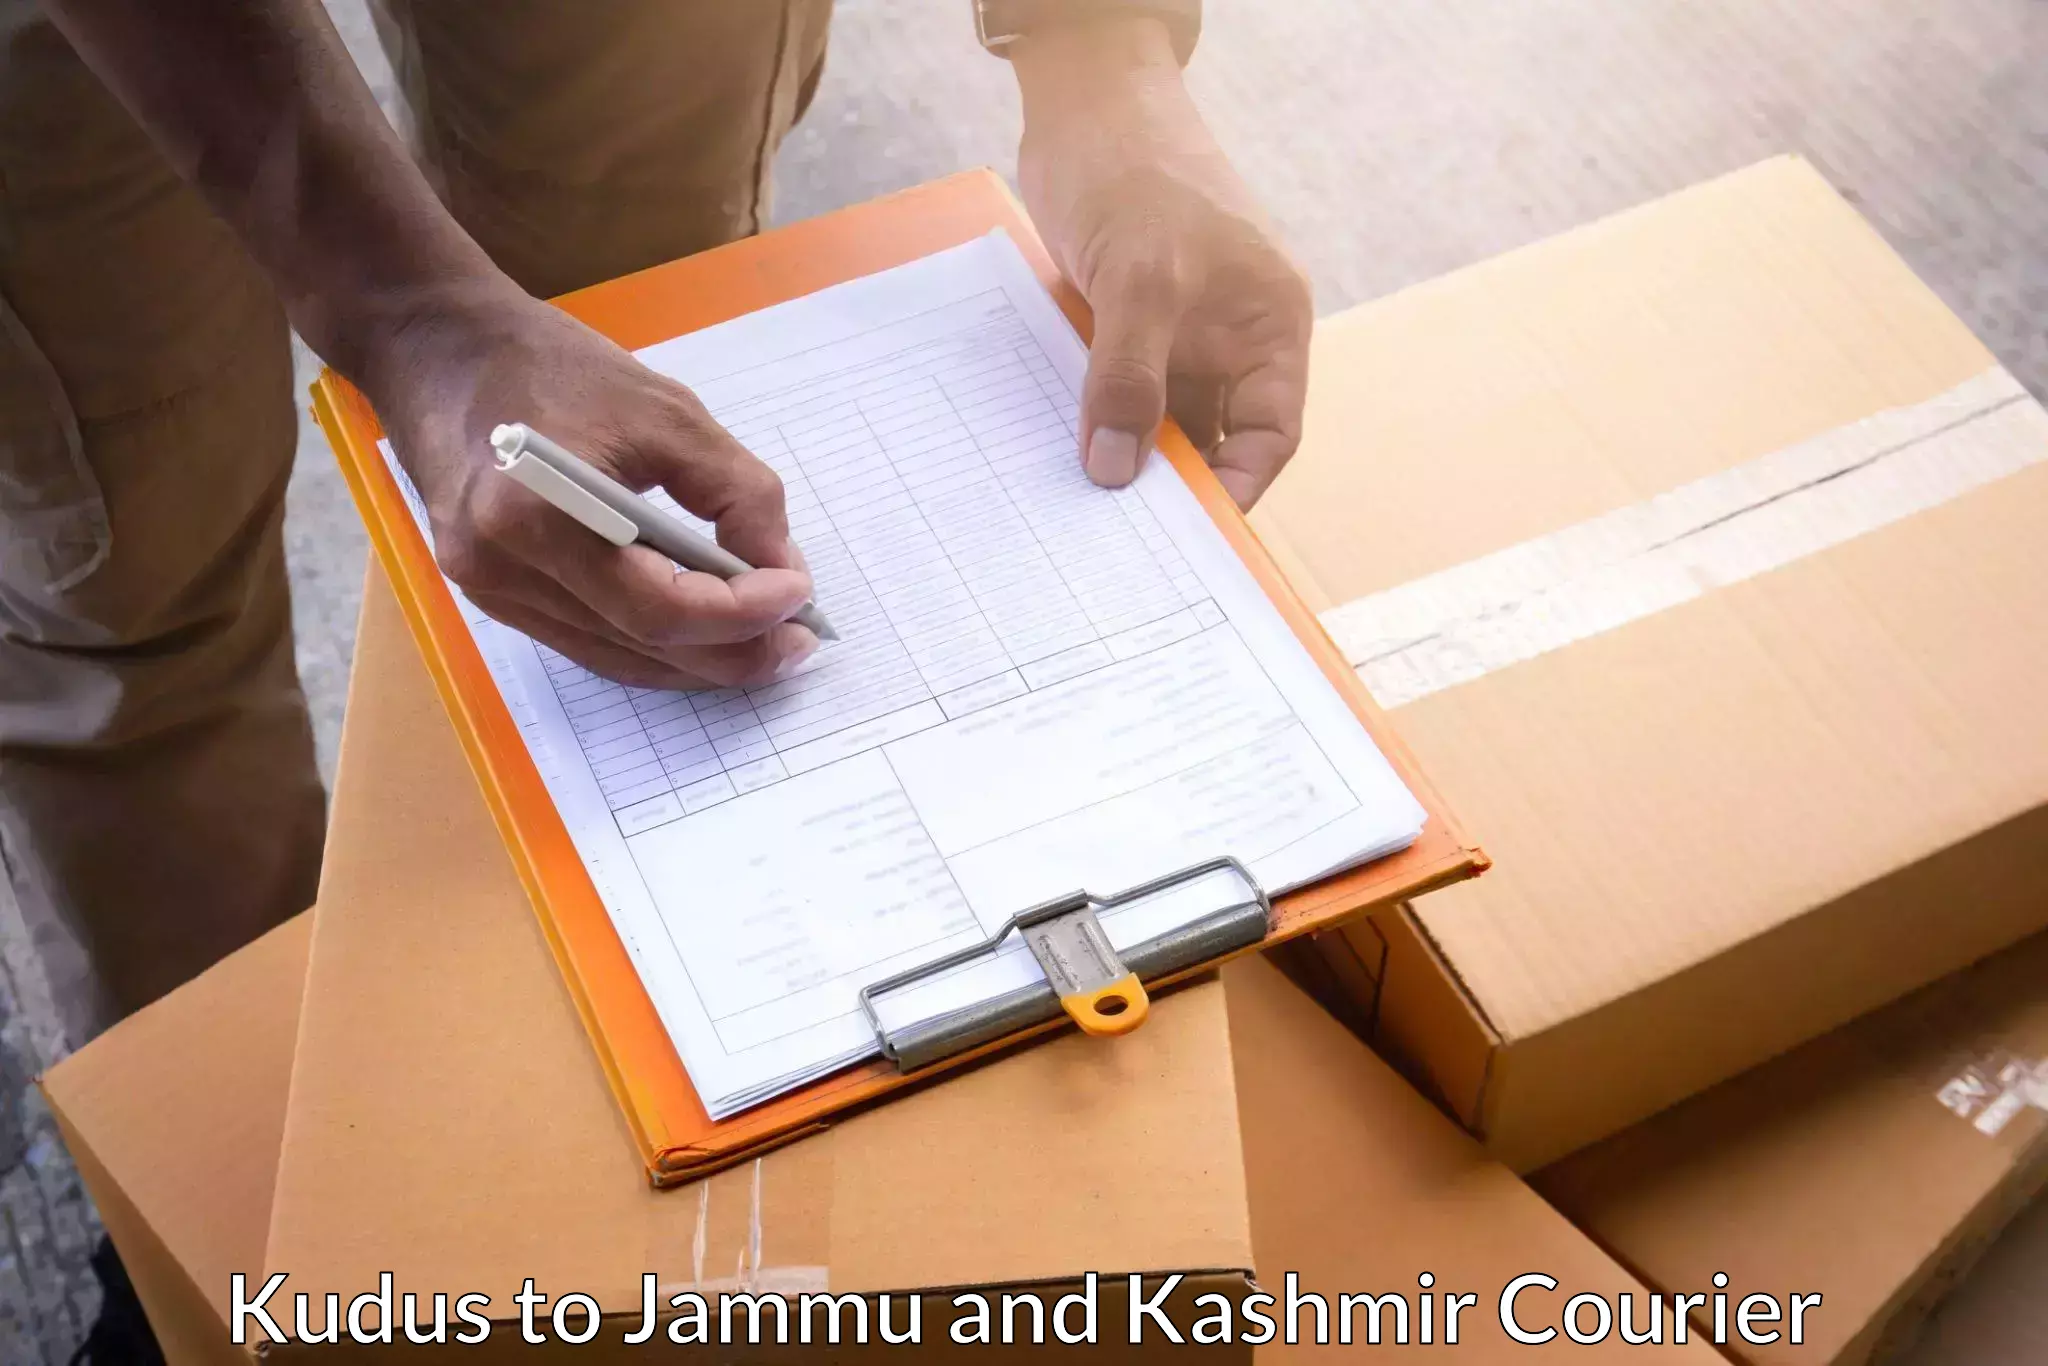 Express delivery solutions Kudus to Jammu and Kashmir